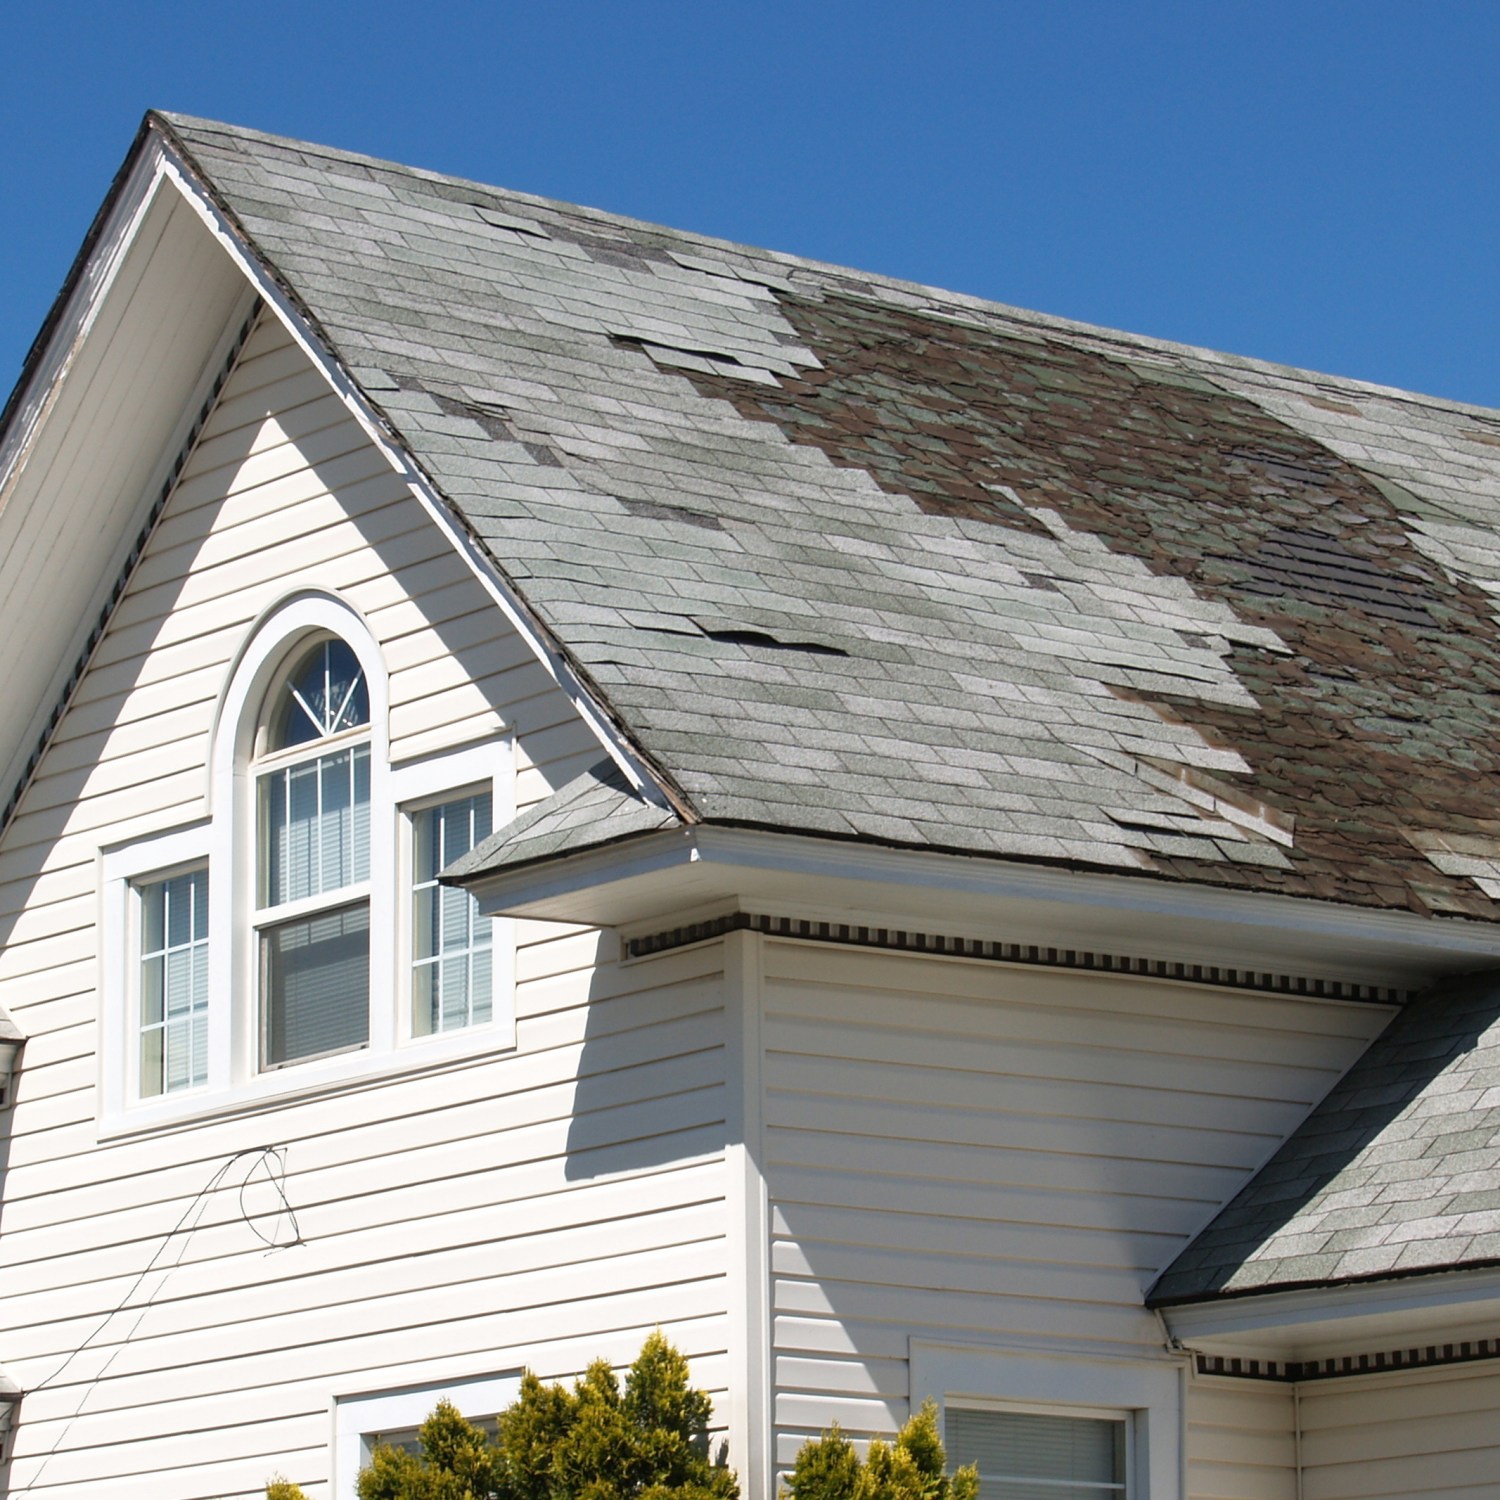 old-roof-repair-replace-white-house-damaged-shingles